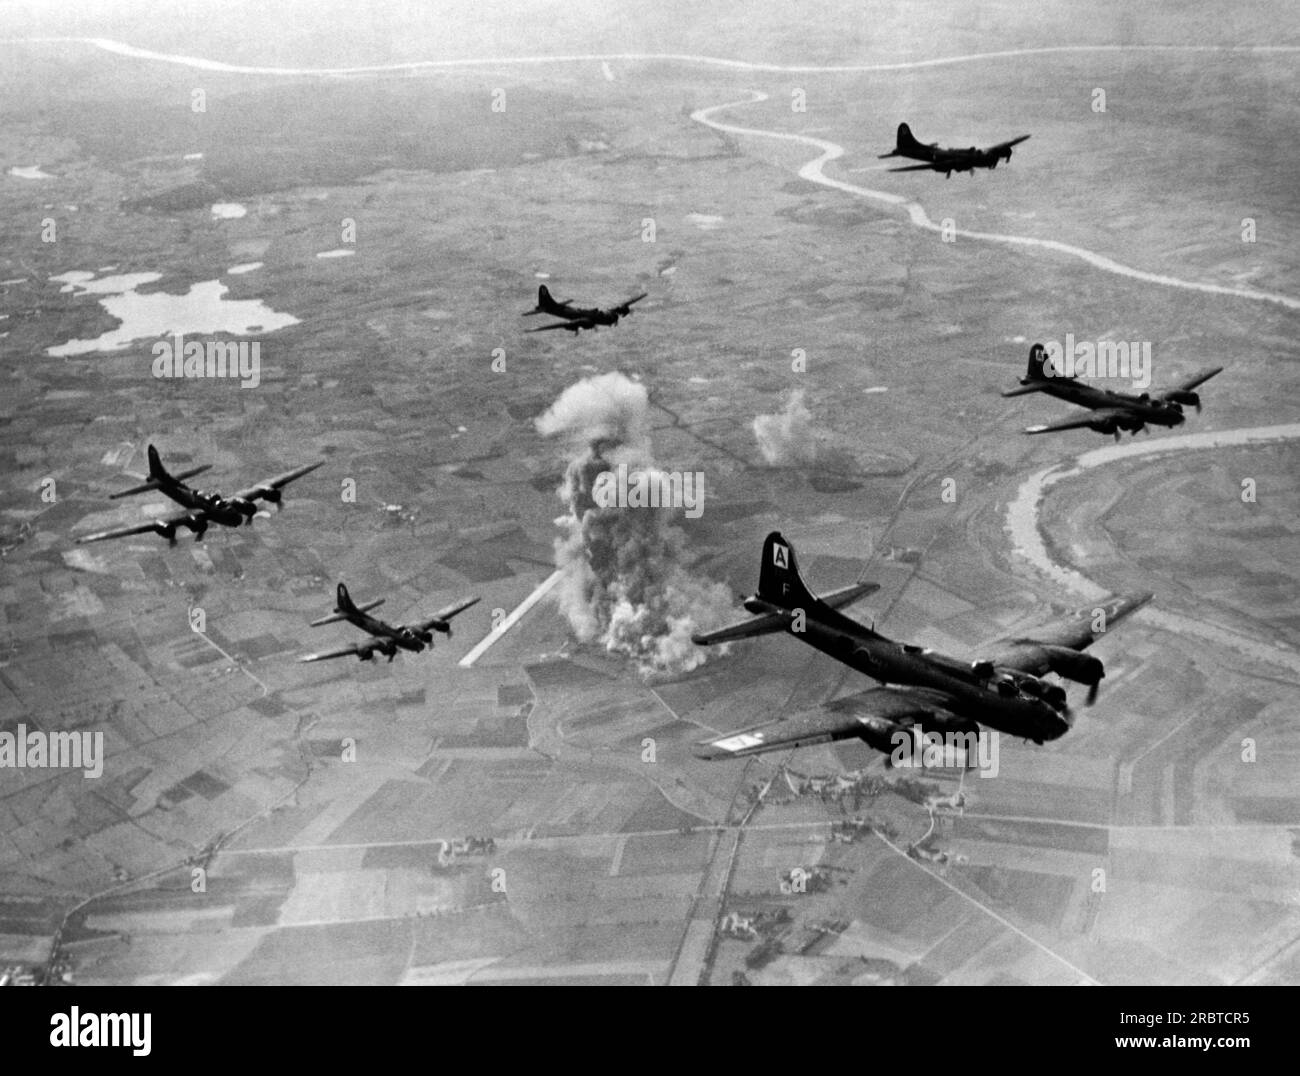 Marienburg, Germany,  October 22, 1943 Smoke rises from the bombed Focke-Wulf aircraft fighter plant as B-17 Flying Fortresses of the US 8th Air Force Bomber Command turn from their target on their way home from what is now Malbork, Poland. Stock Photo